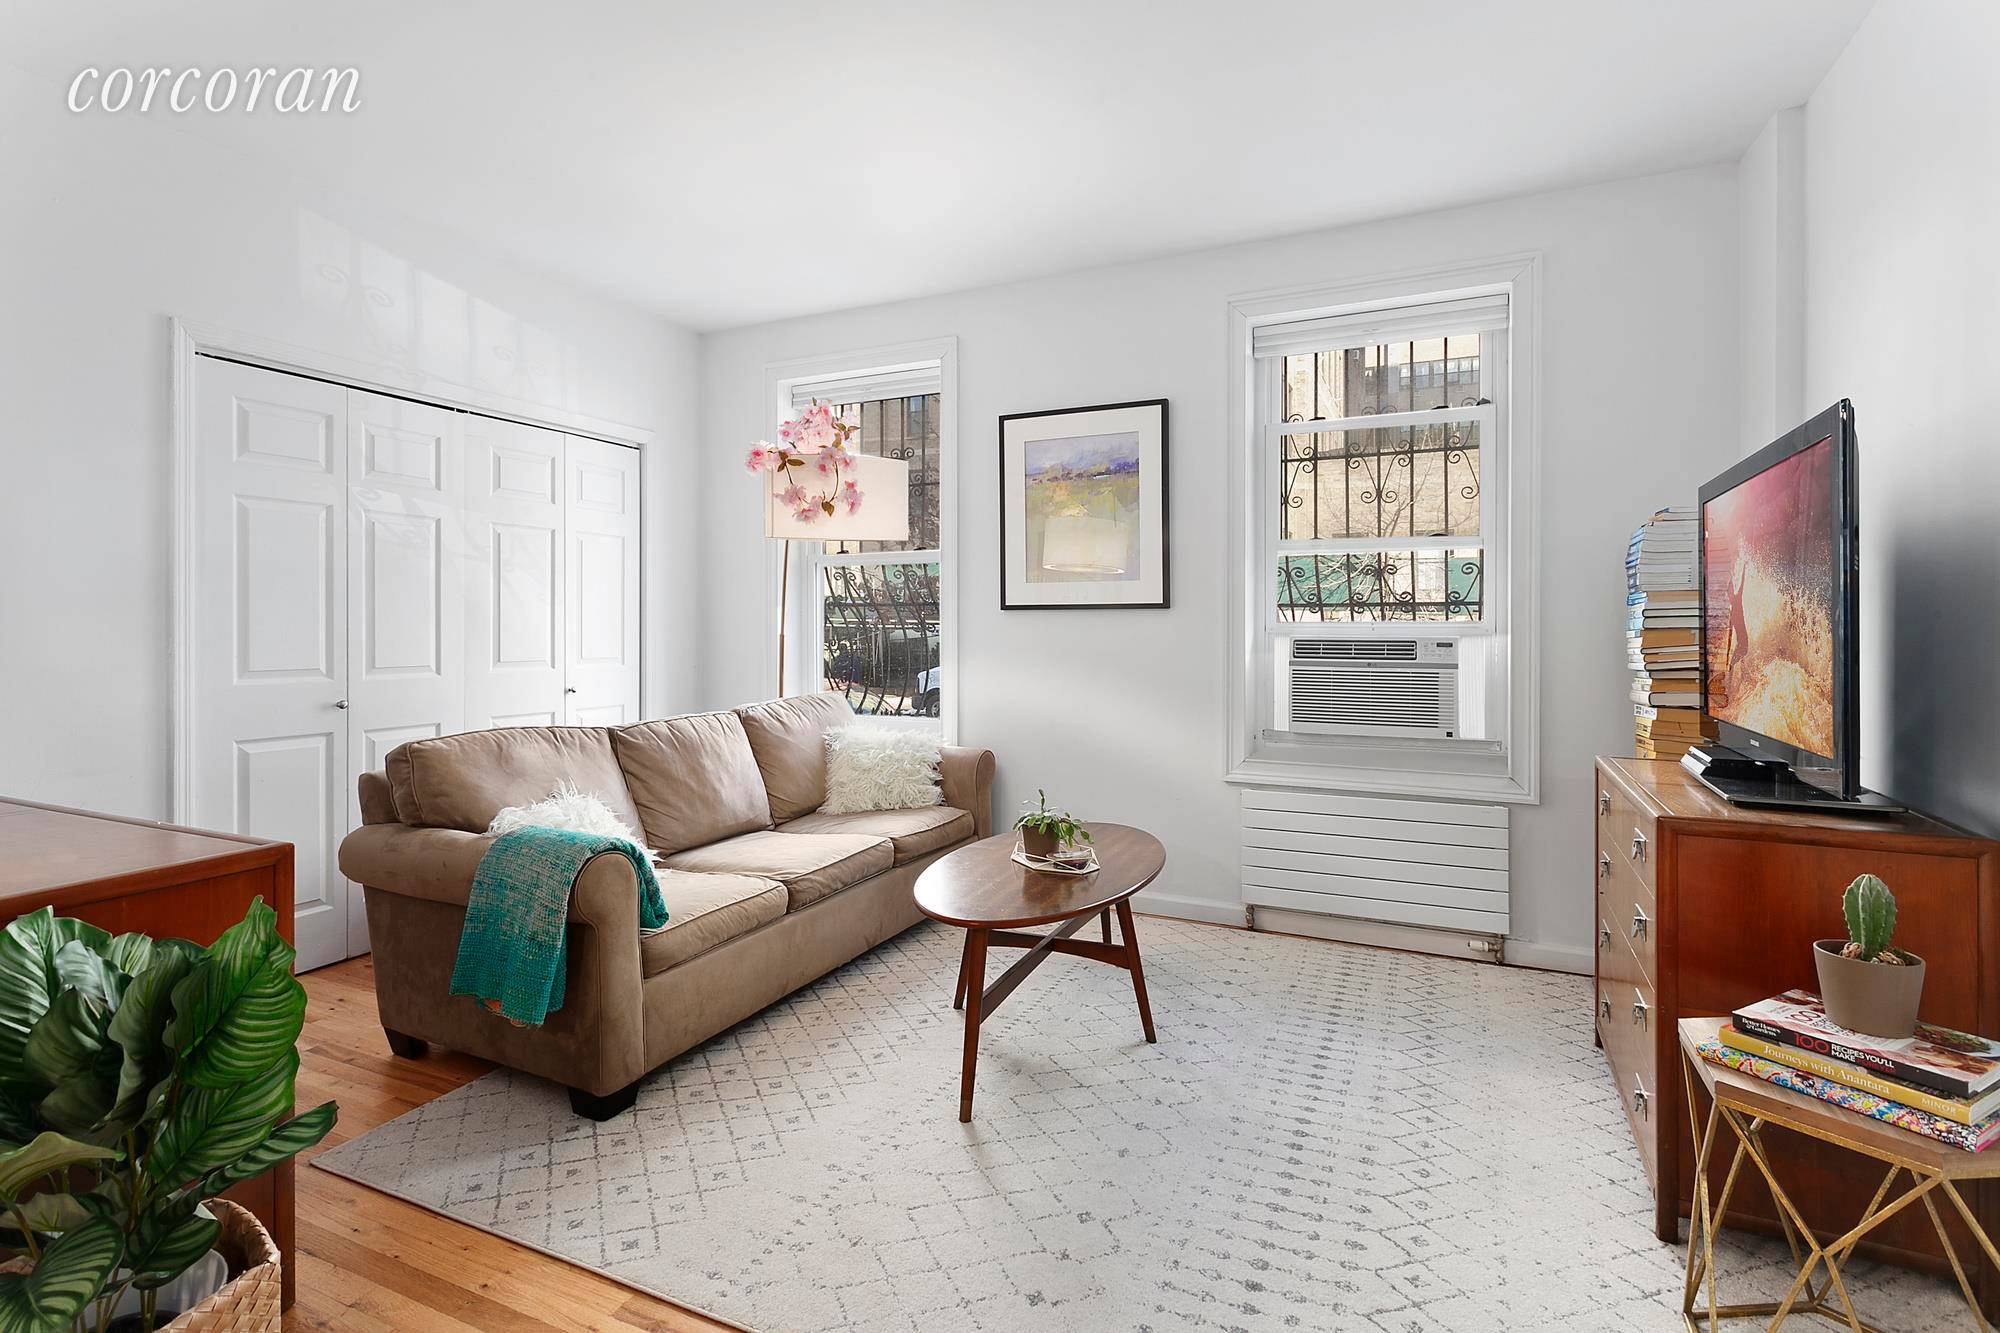 566 Prospect Place 1A is a ground floor beautifully renovated two bedroom coop in prime Crown Heights Prospect Heights with everything you need to call home.